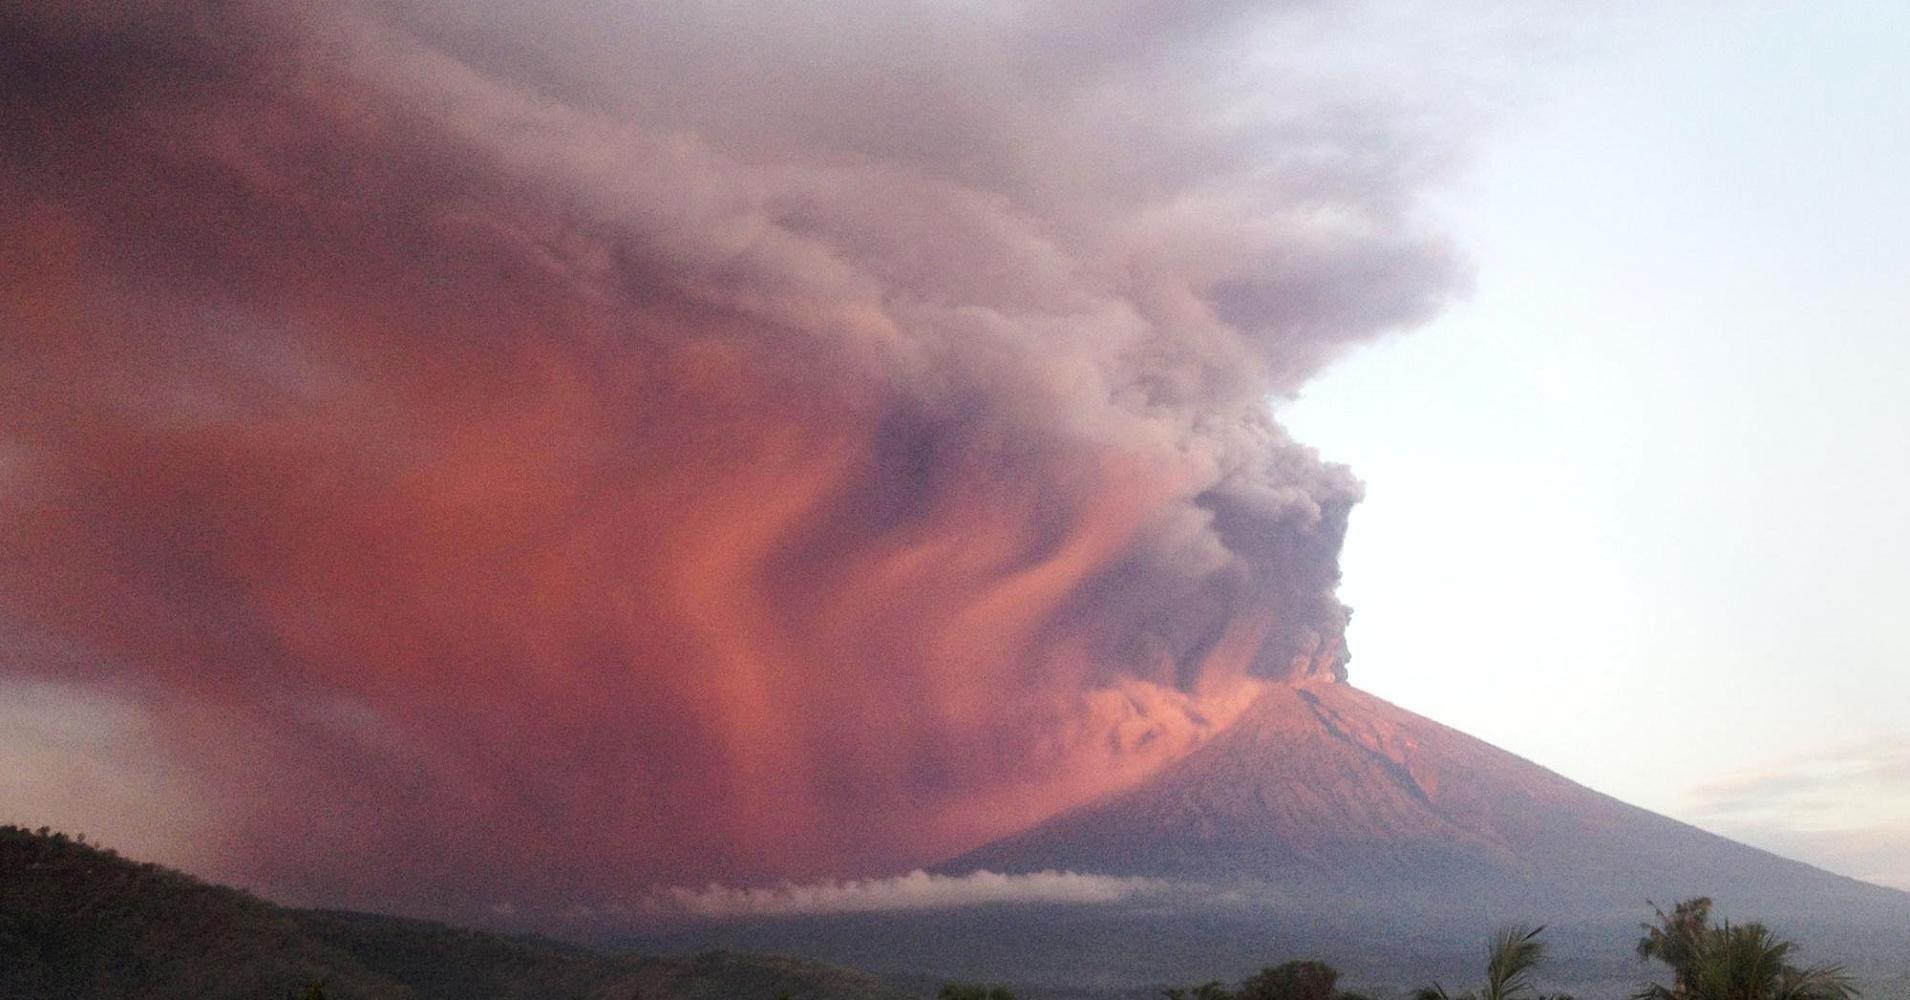 image from the Bali volcano eruption